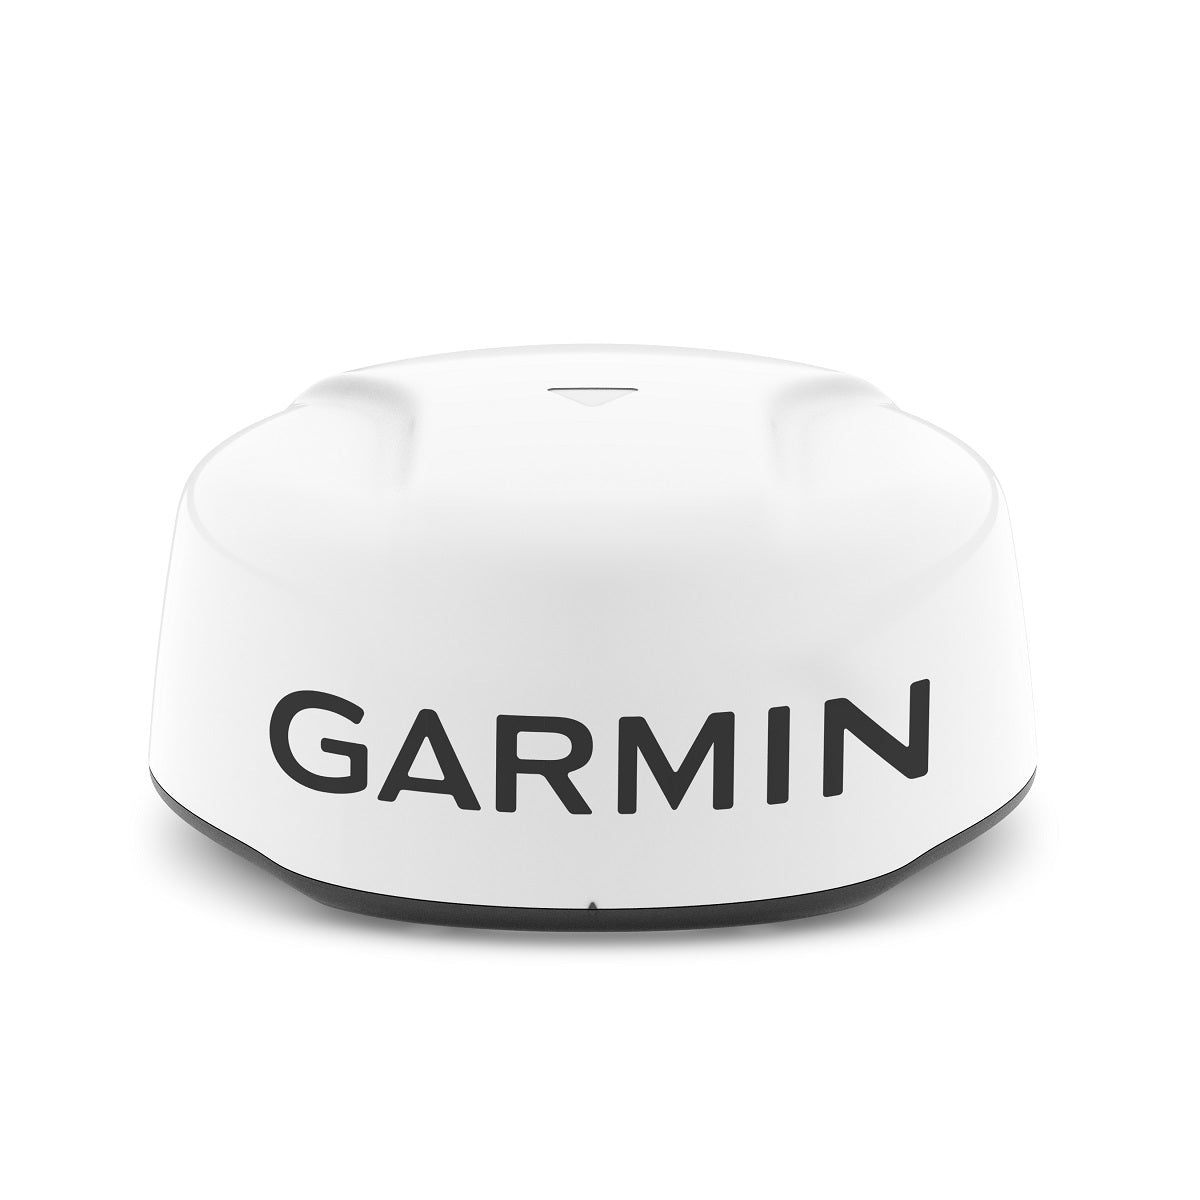 Garmin Gmr18 Hd3 18""  4kw Radar Dome With 15m Cables